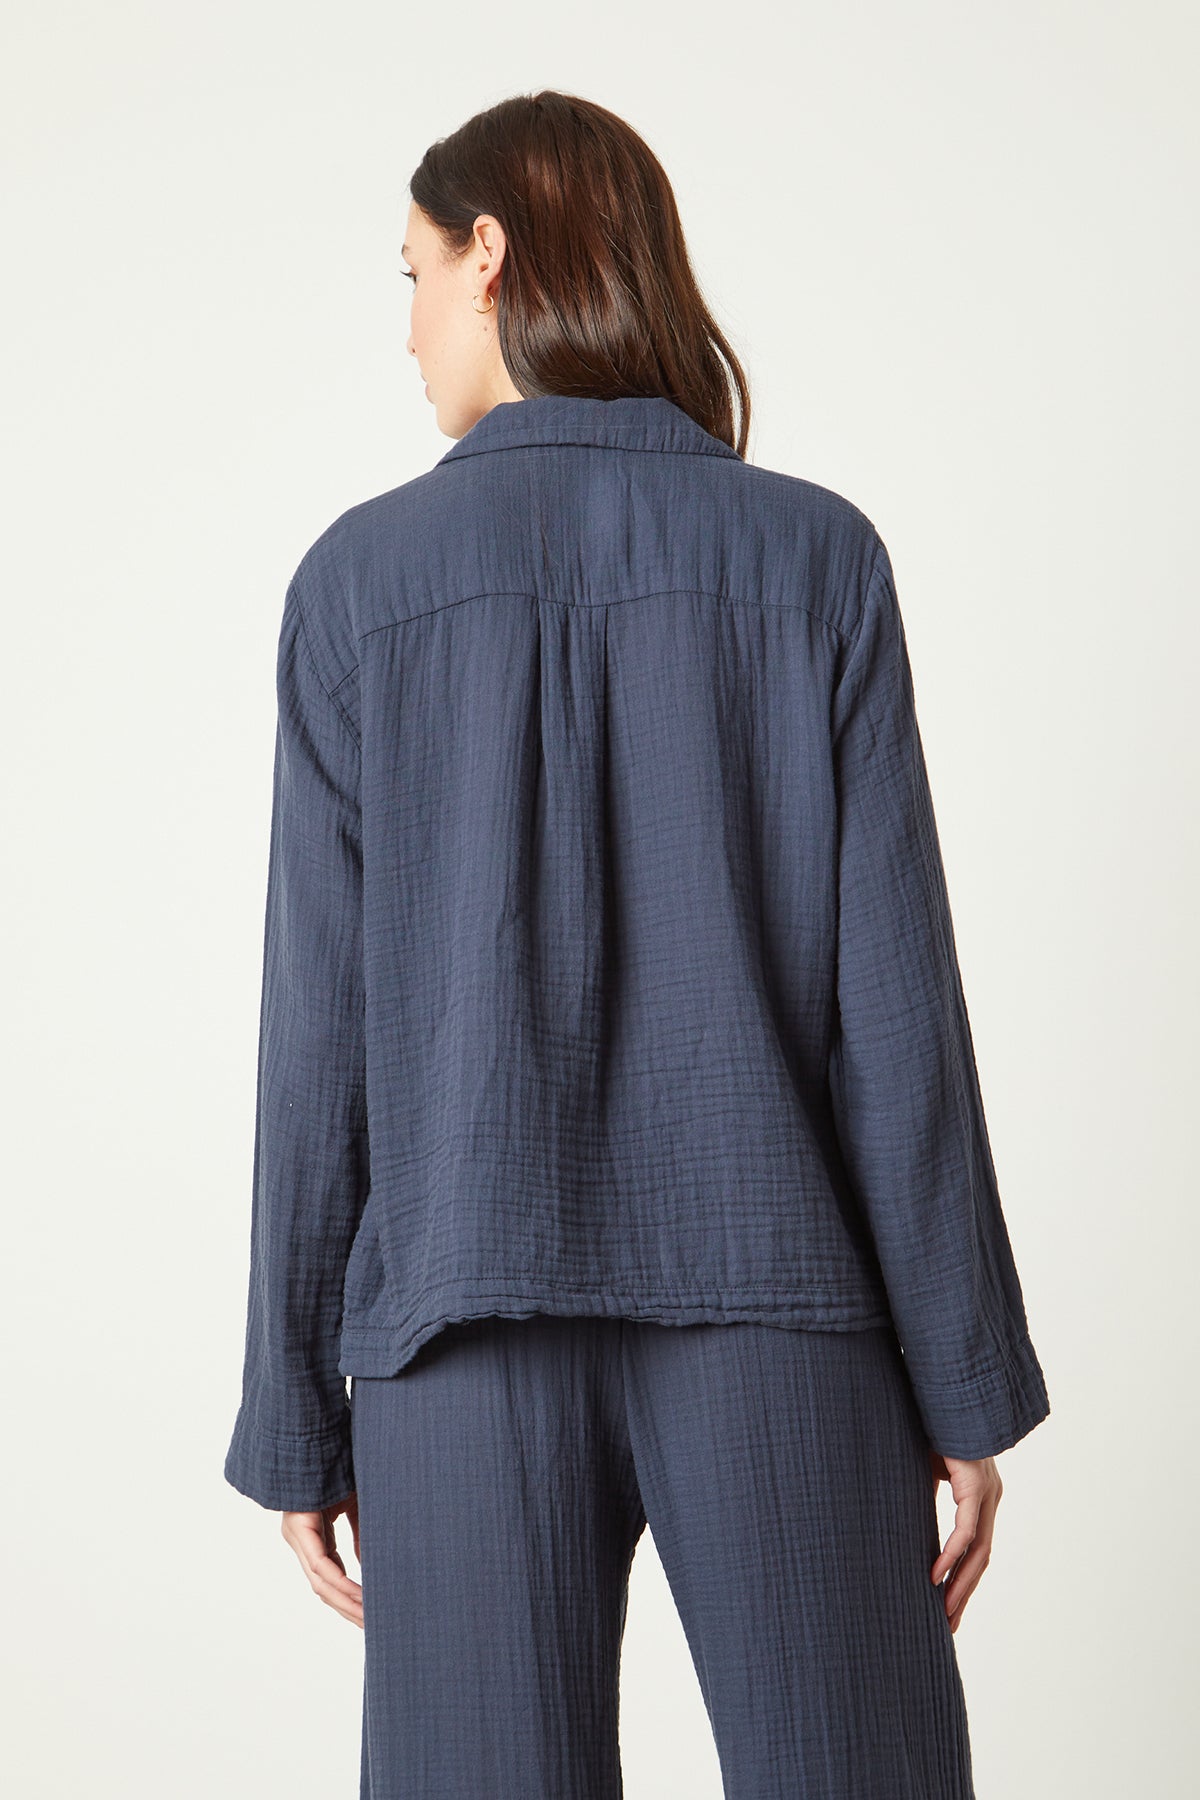 The back view of a woman wearing a blue linen PAJAMA SHIRT from Jenny Graham Home.-25519548137665